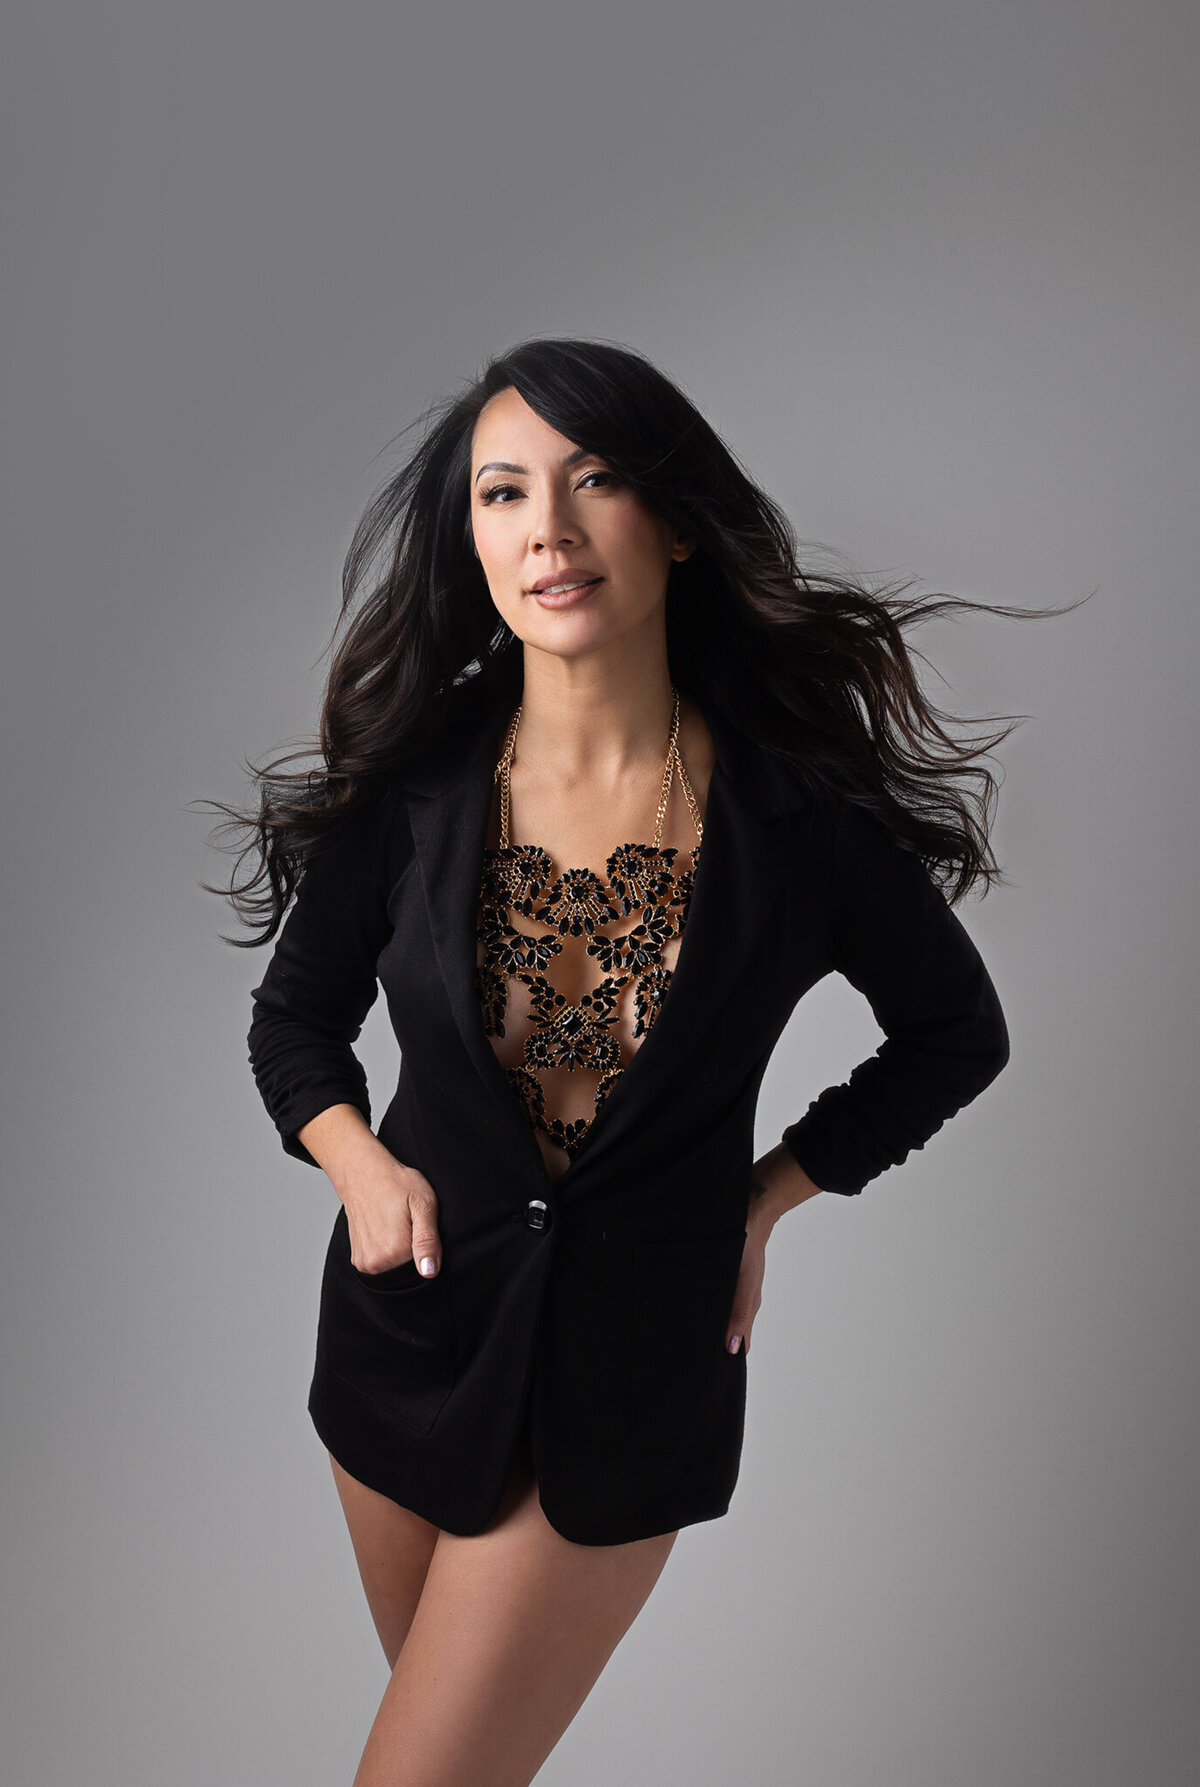 asian mature woman is posing with a blazer and a metal chain  white topless over a grey backdrop for her boudoir session